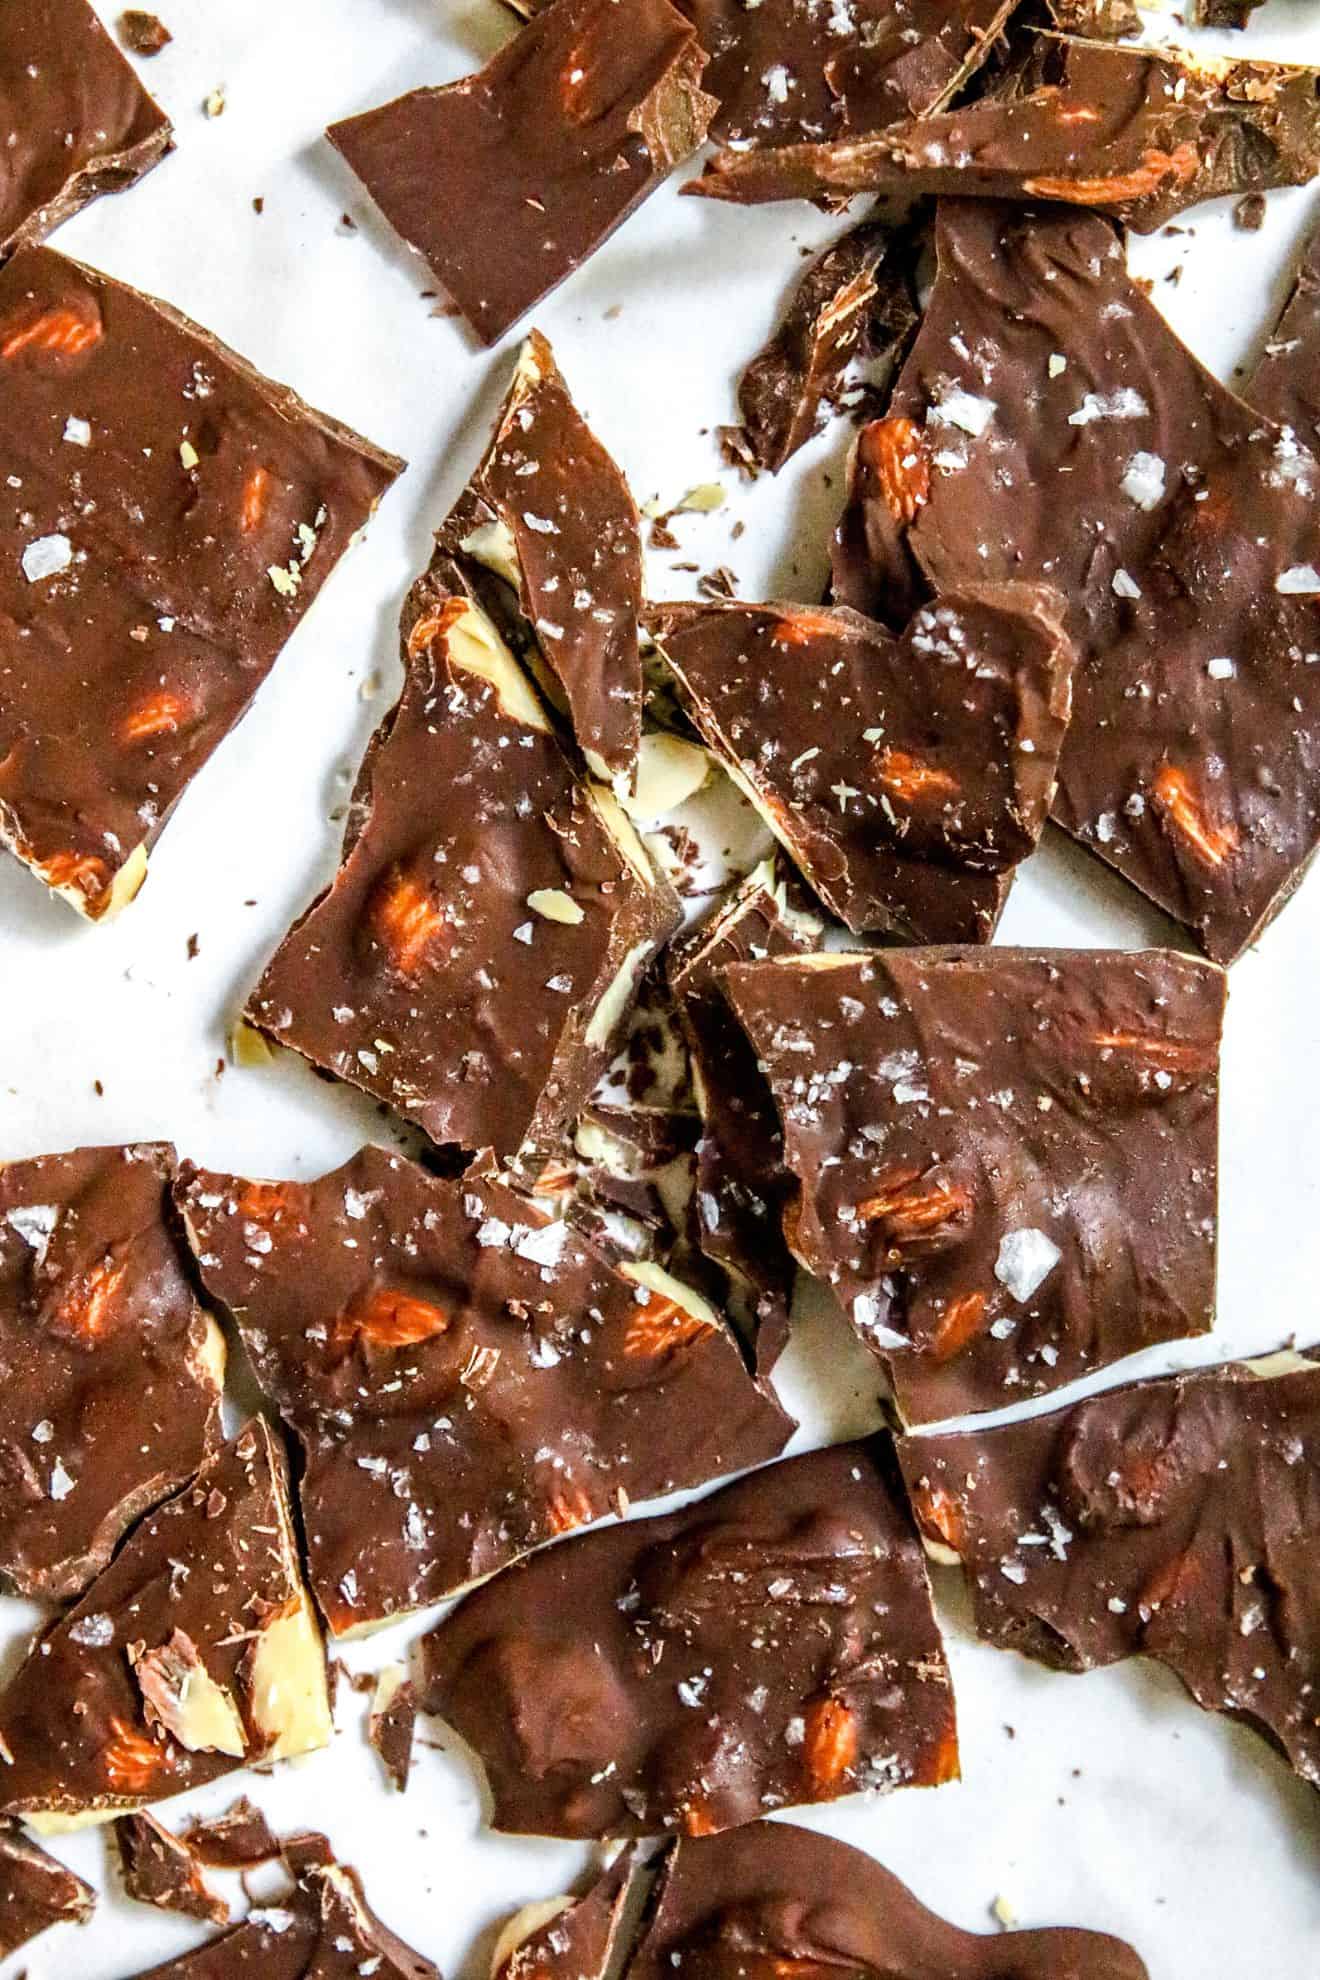 This is an overhead image of chocolate bark broken apart into pieces. The bark is sprinkled with flakey salt.